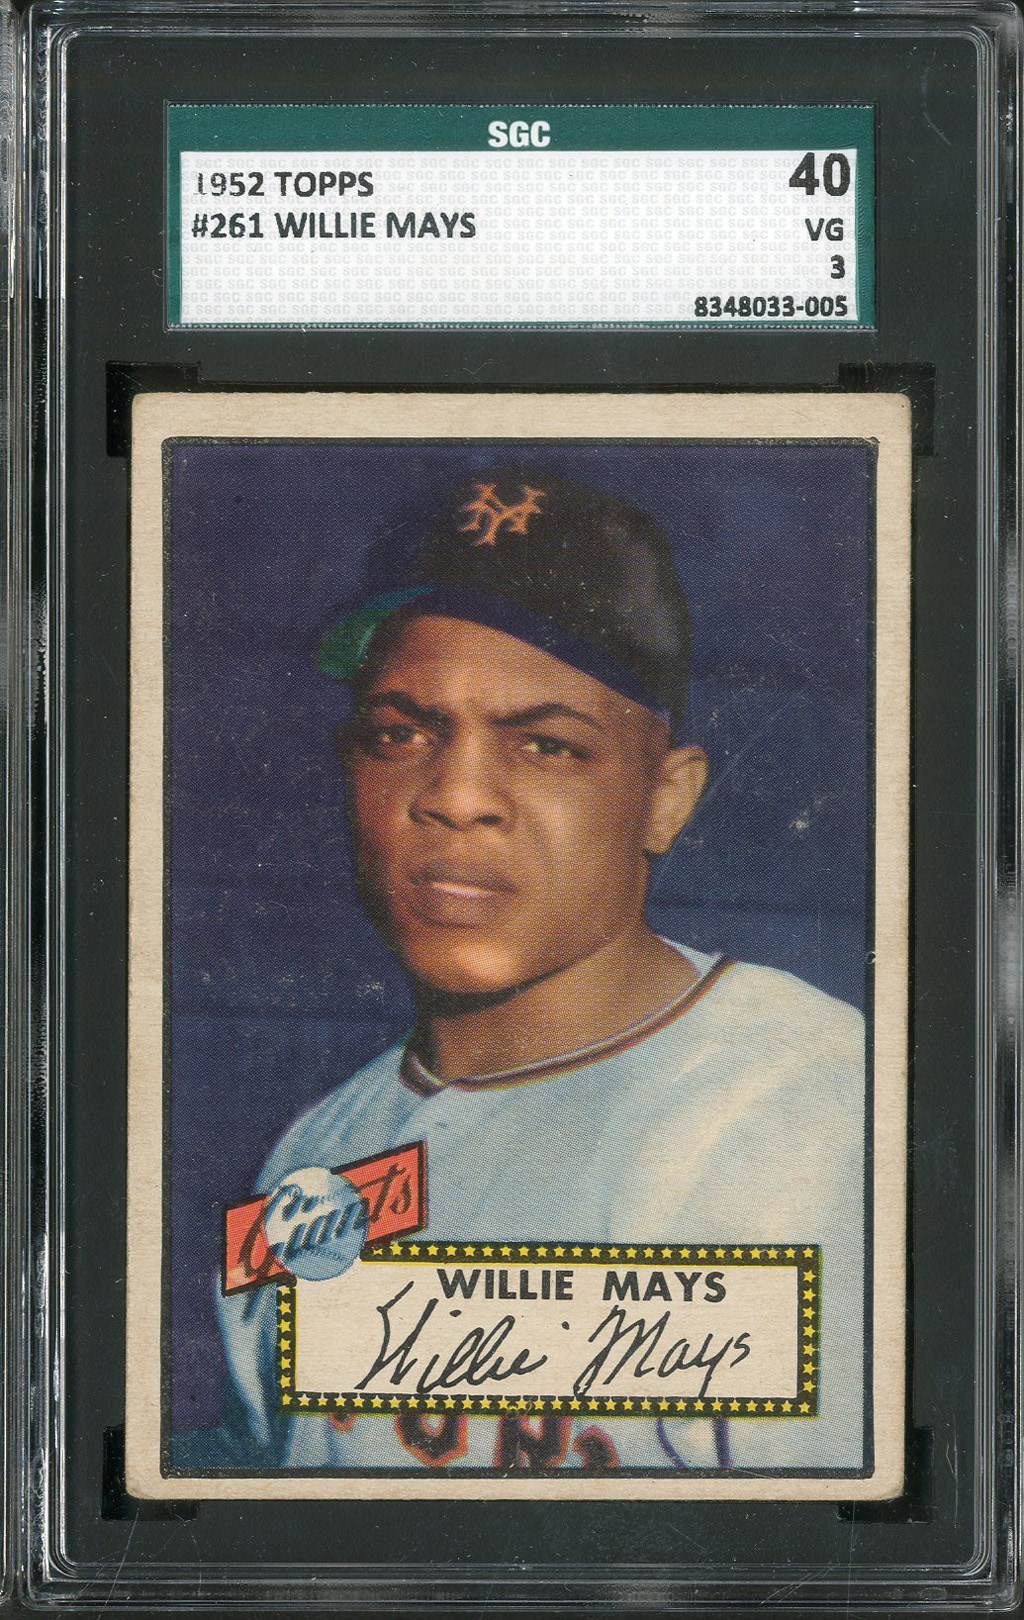 Baseball and Trading Cards - 1952 Topps #261 Willie Mays - SGC 40 VG 3